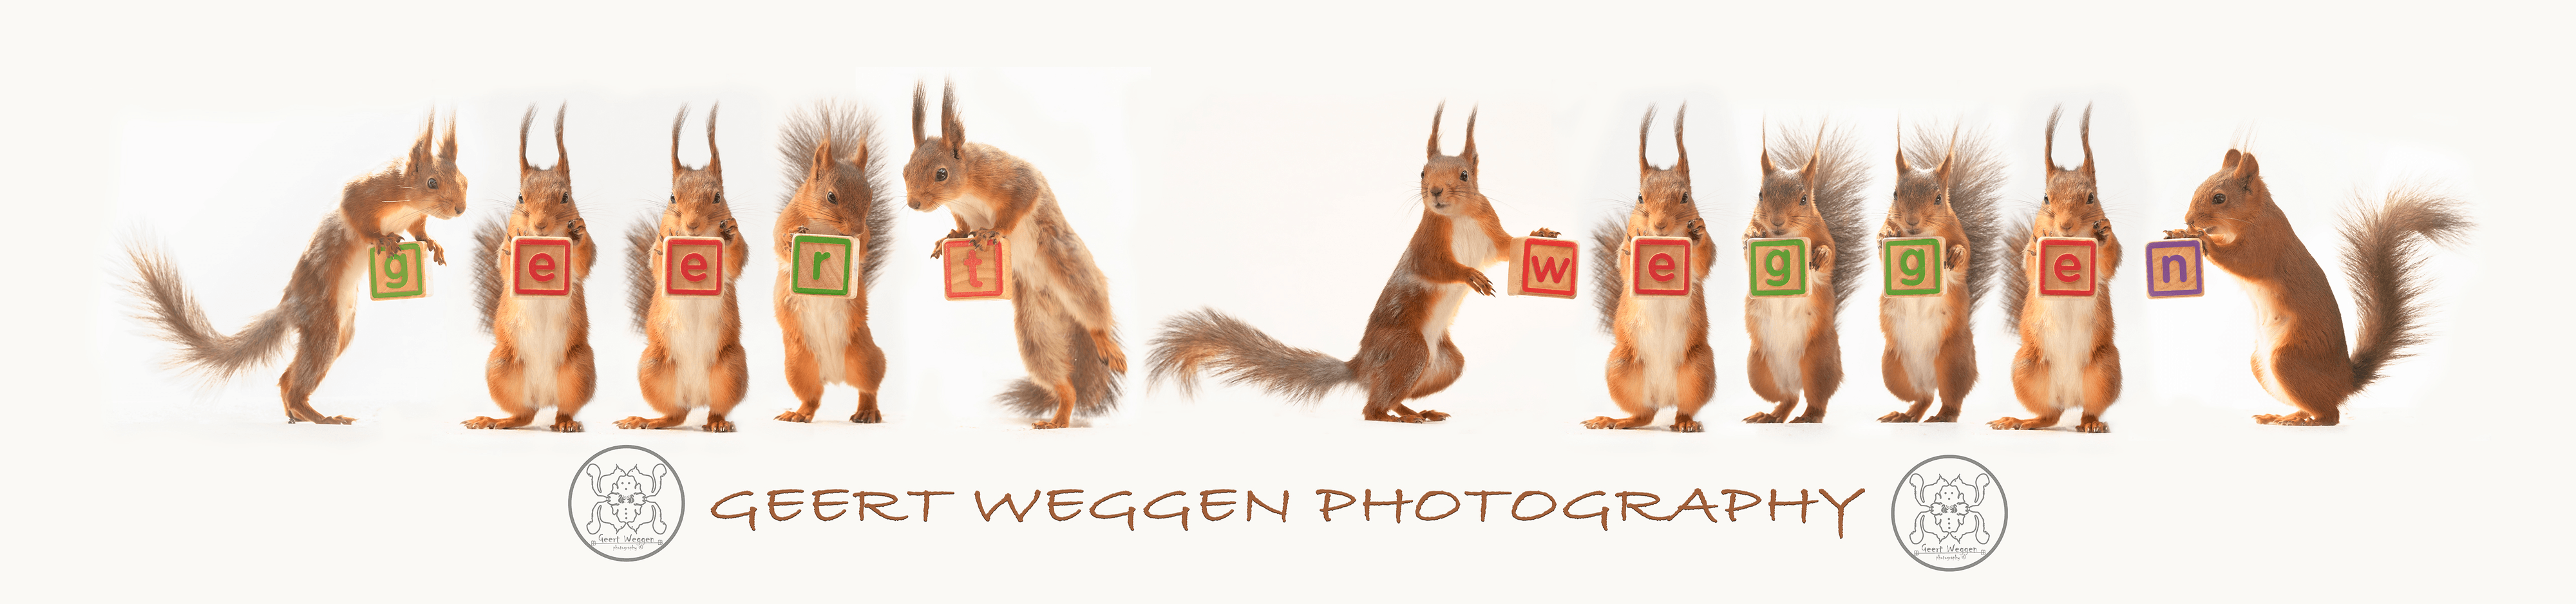 Awarded red squirrel photos